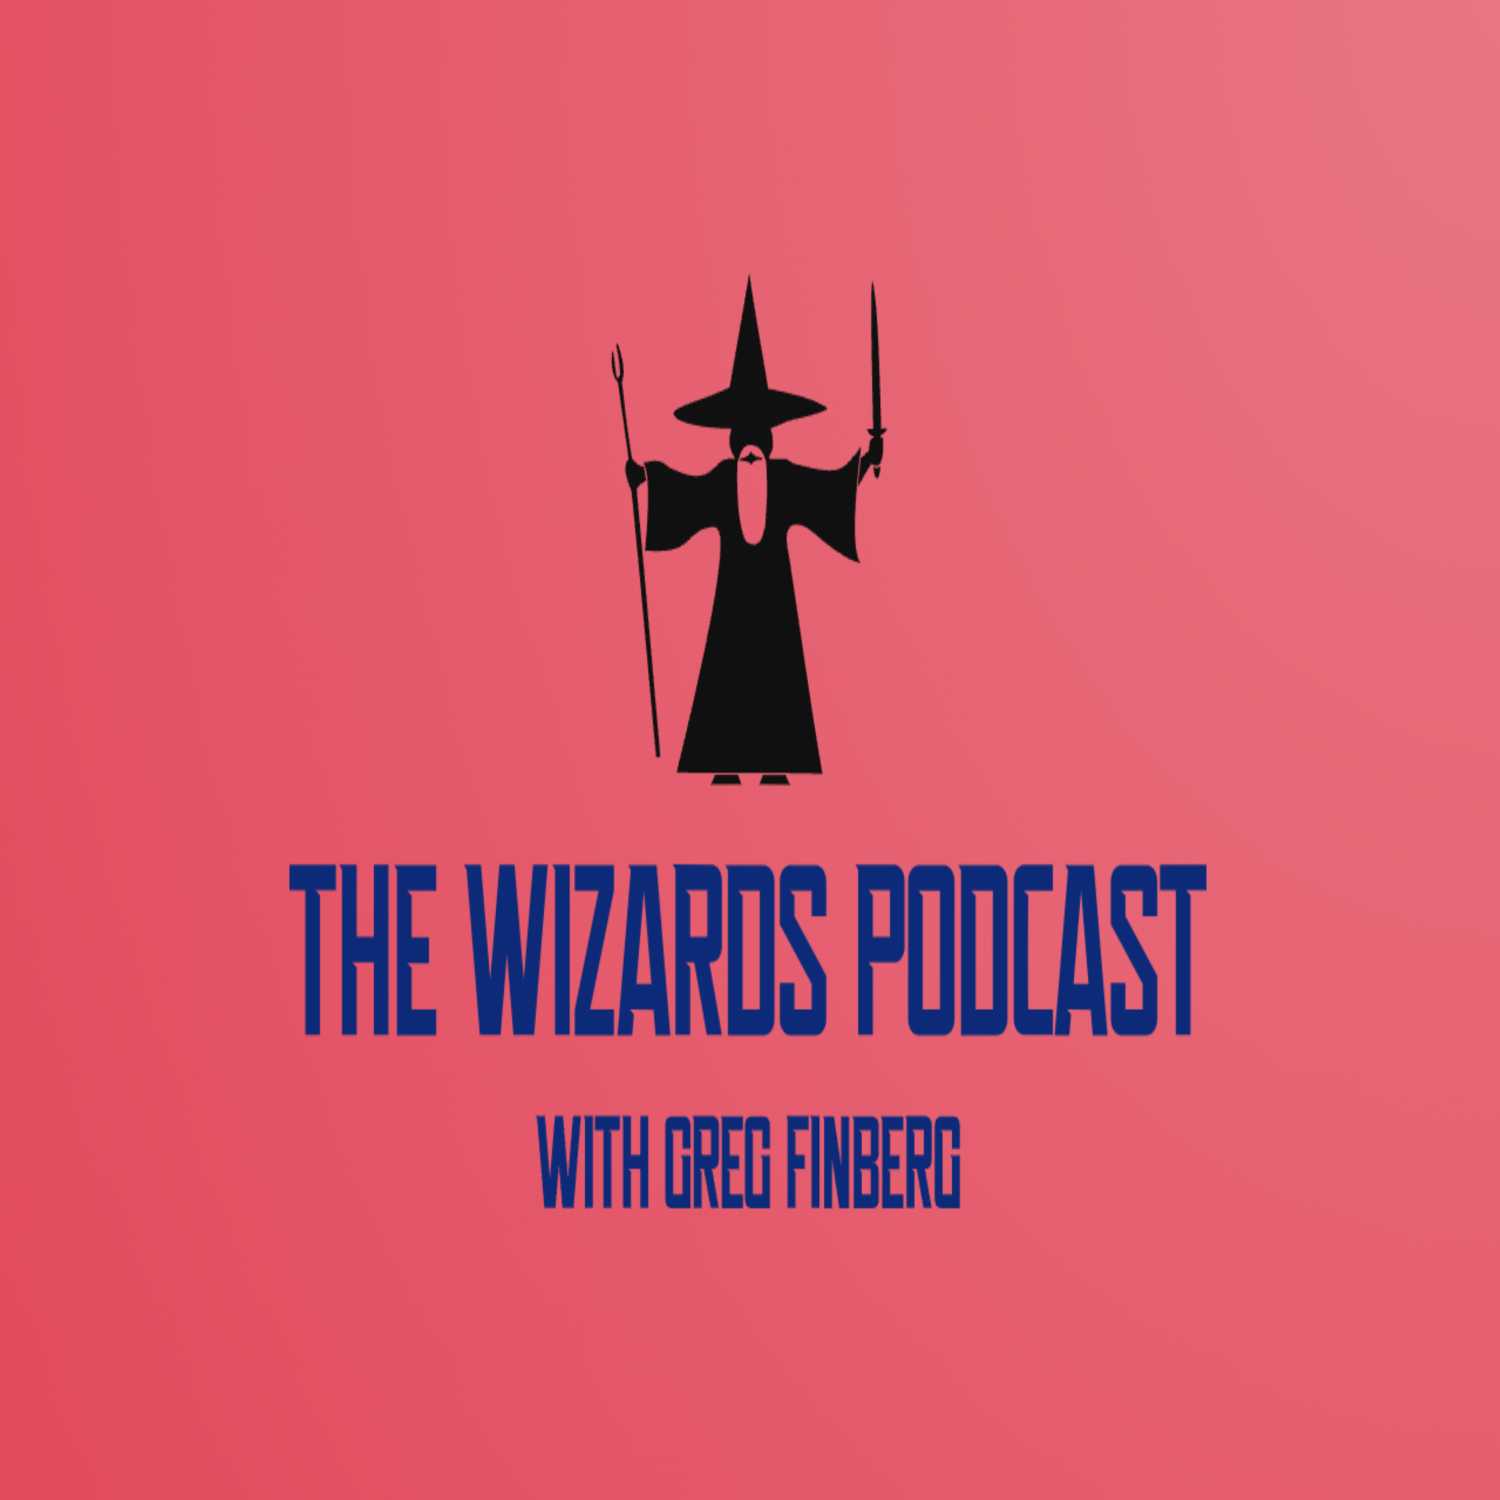 The Wizards Podcast